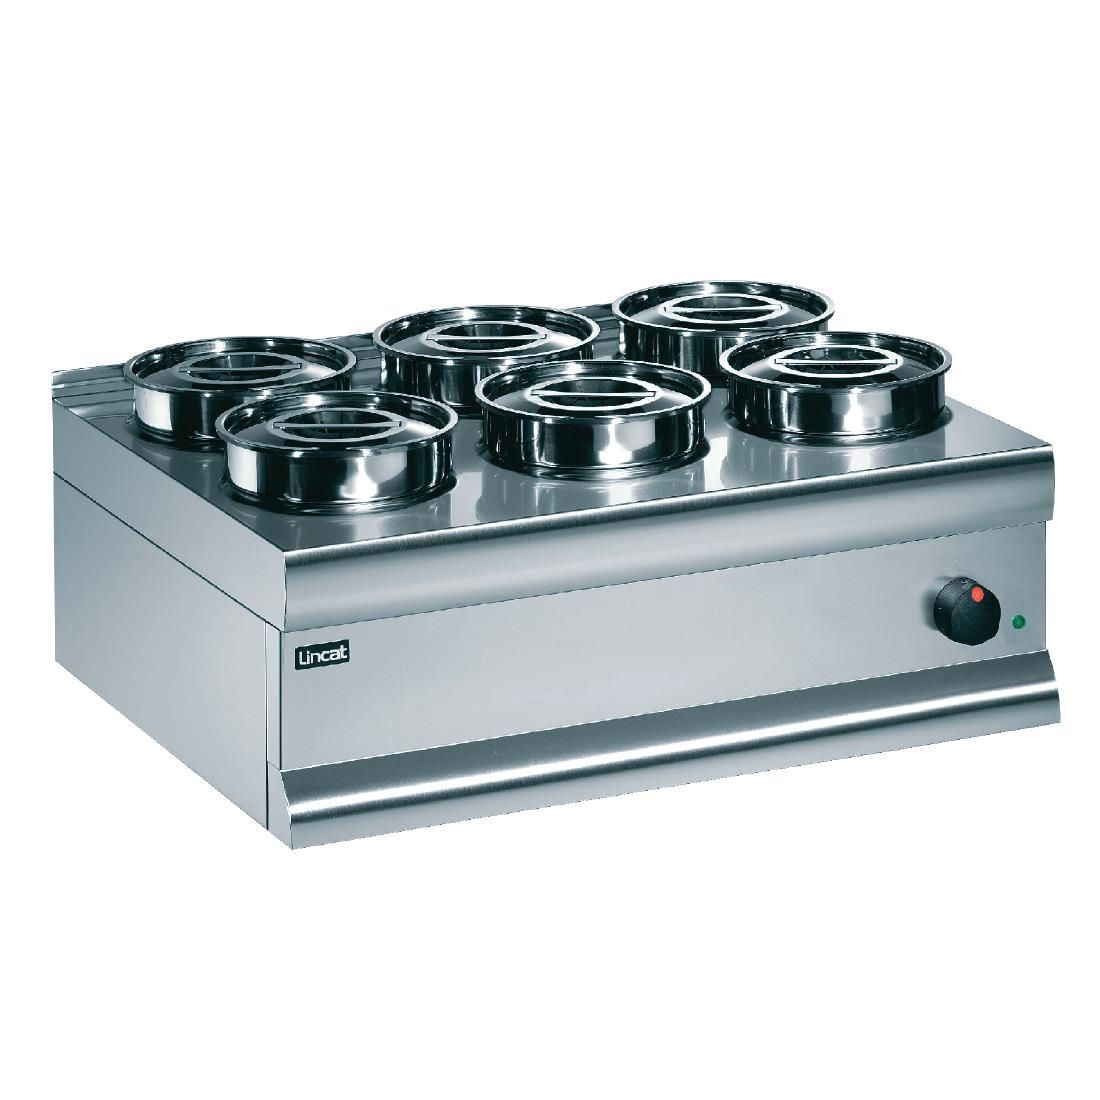 BS7 - Lincat Silverlink 600 Electric Counter-top Bain Marie - Dry Heat - Round Pots - Base + 6 Pots - W 750 mm - 1.0 kW JD Catering Equipment Solutions Ltd